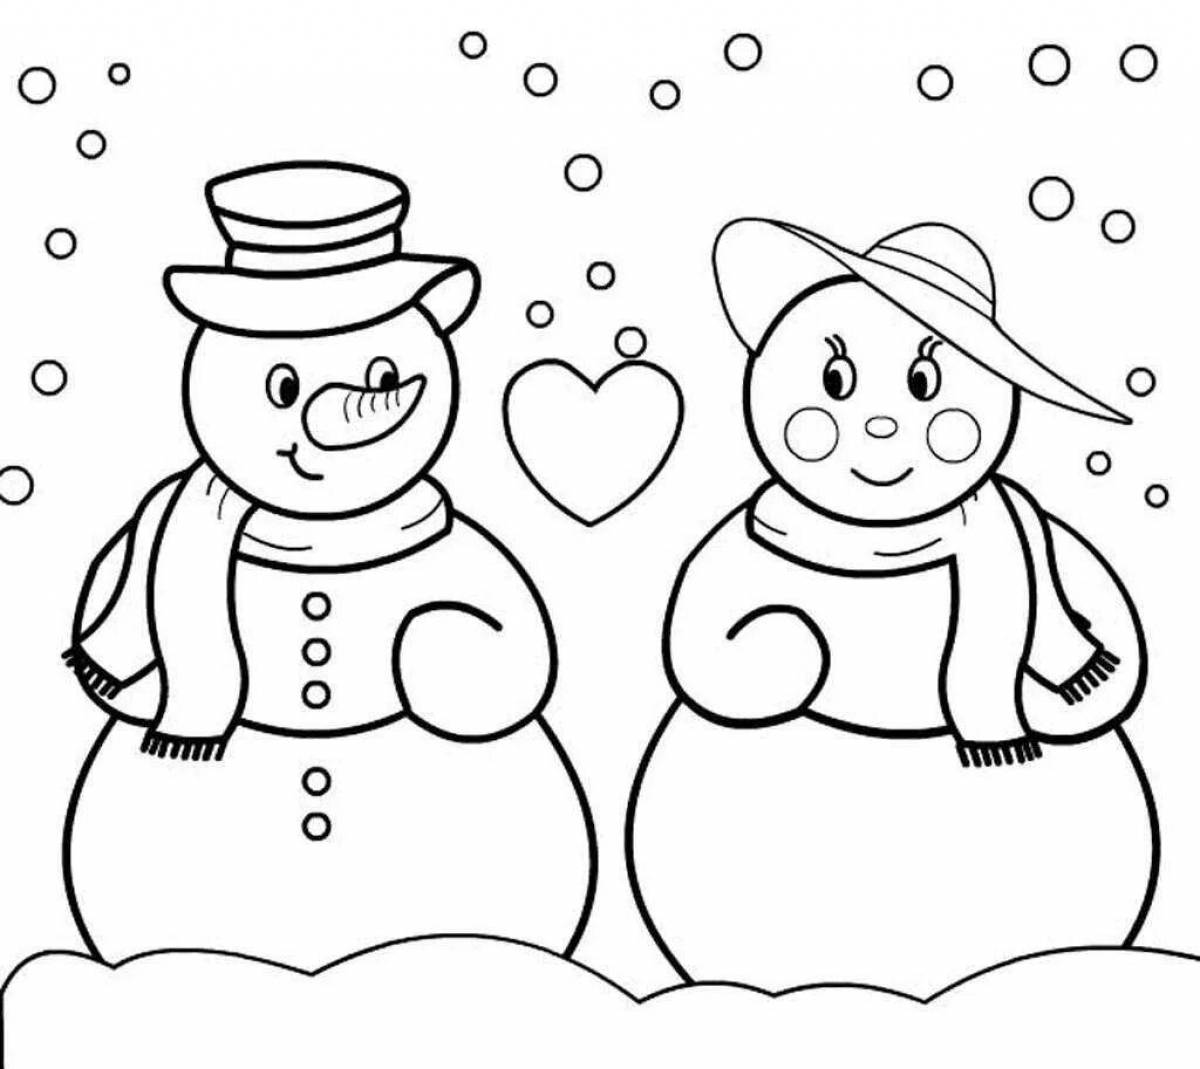 Creative snowman coloring for kids 5 6